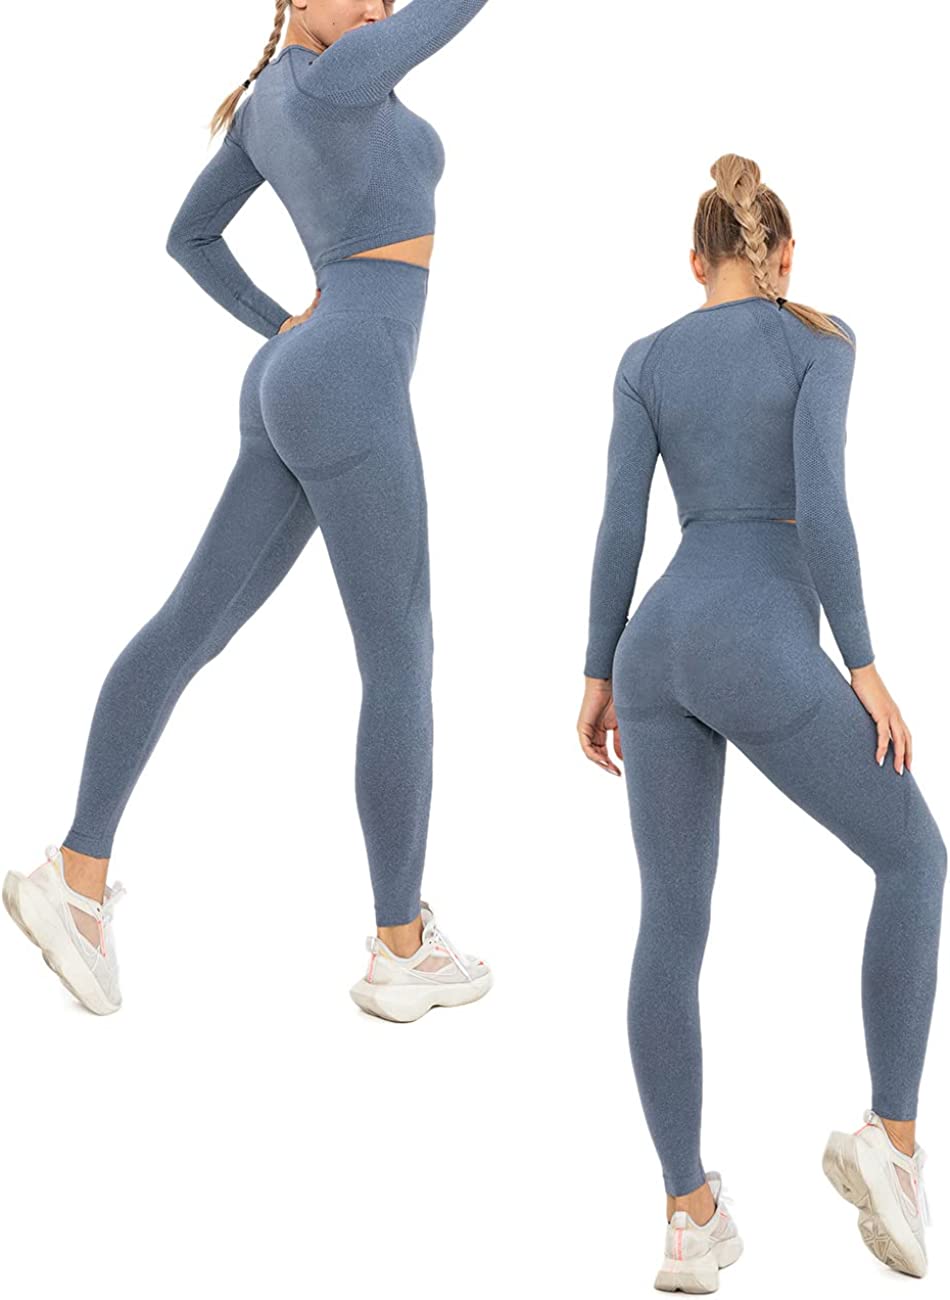  Workout Outfit for Women 2 Piece Butt Lifting Gym Yoga